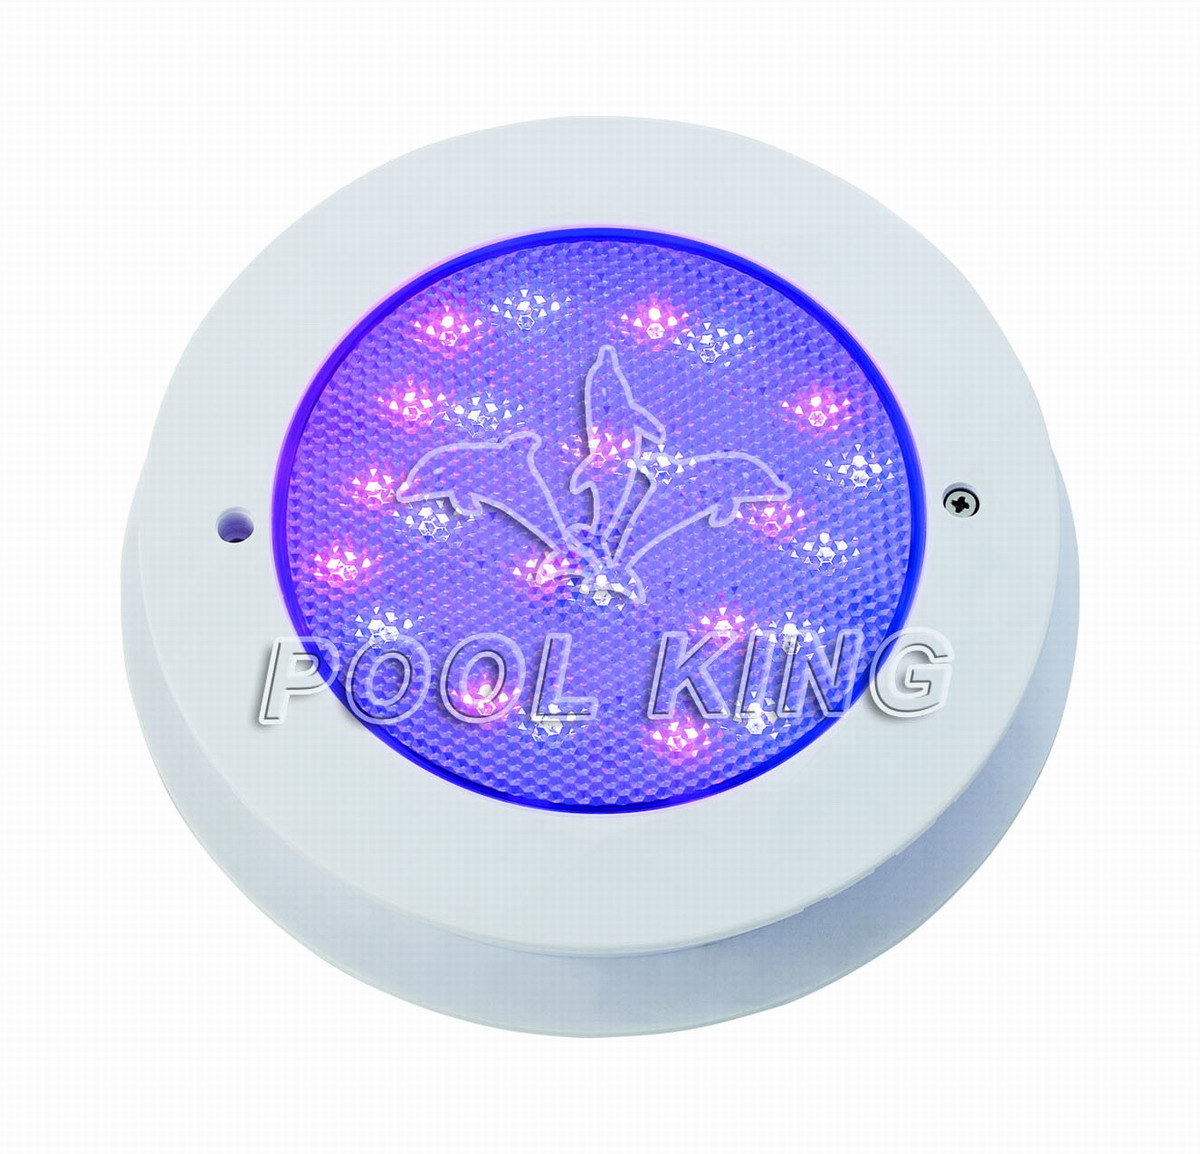 Tlw LED Series Underwater Light for Swimming Pool